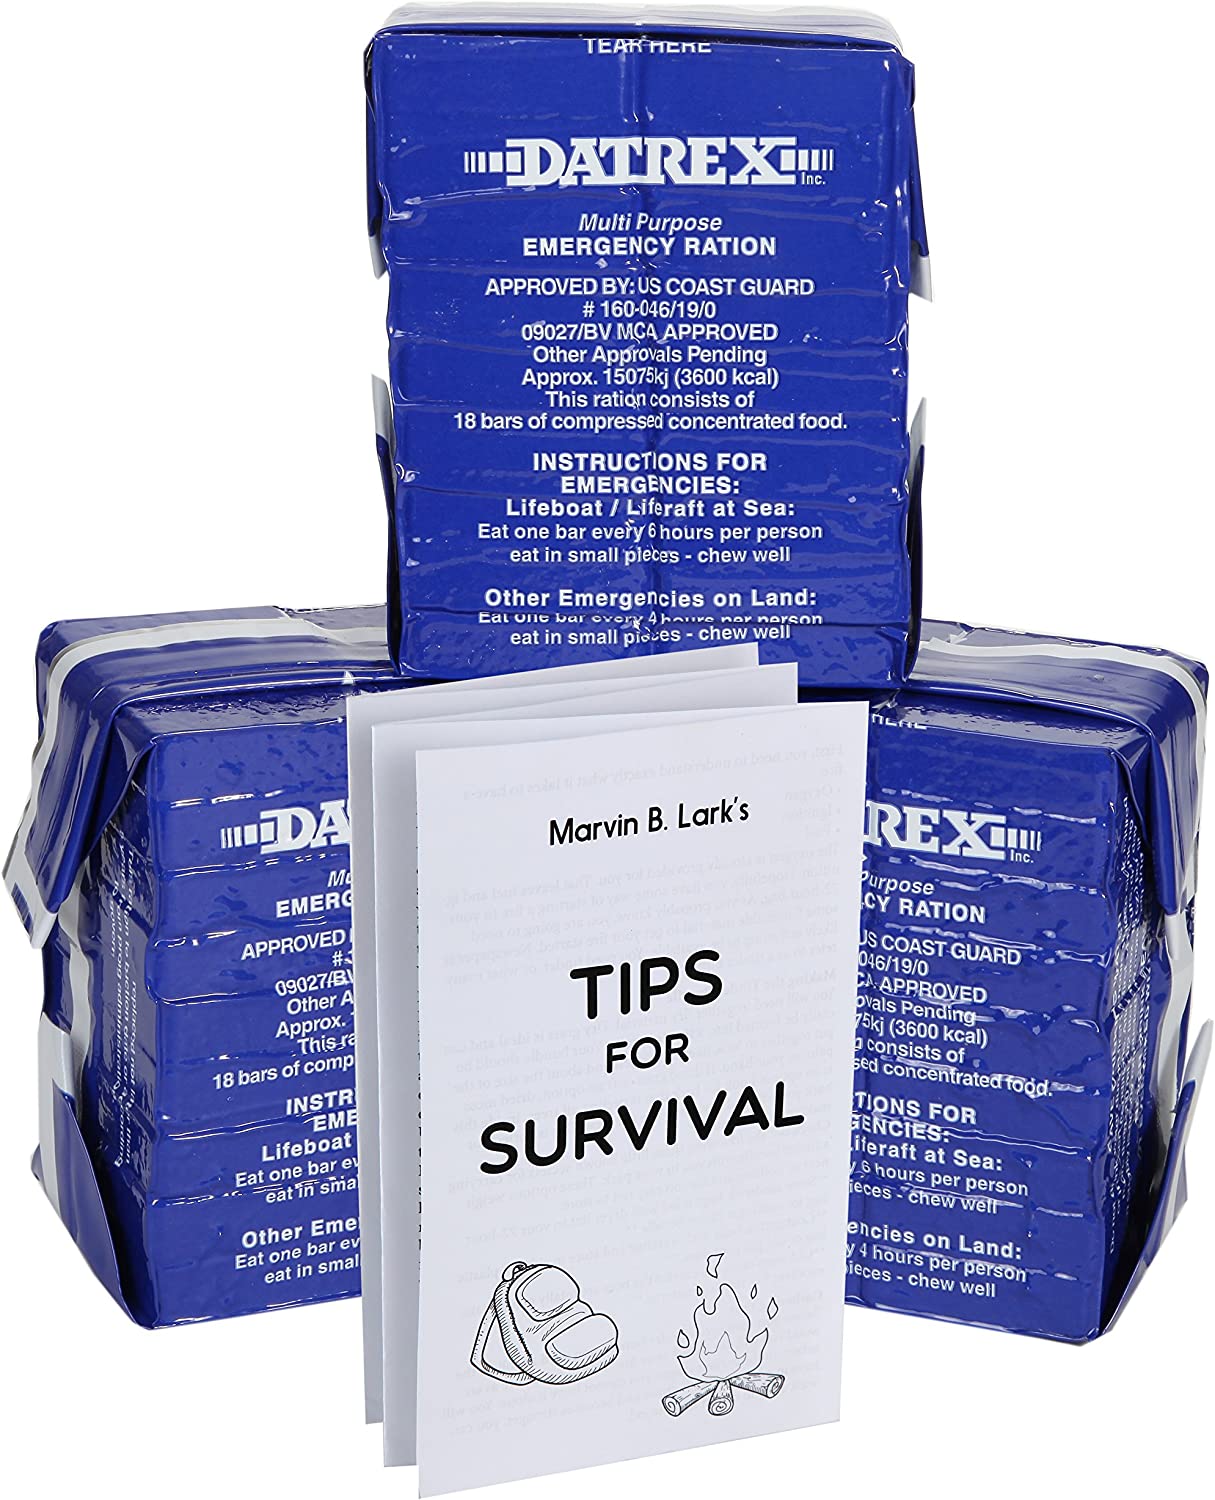 Datrex 3600 Calorie Emergency Food Bar for Survival Kits, Disaster Preparedness, Survival Gear, Survival Supplies, Schools Supplies, Disaster Kit 3 pack (WITH TIPS)